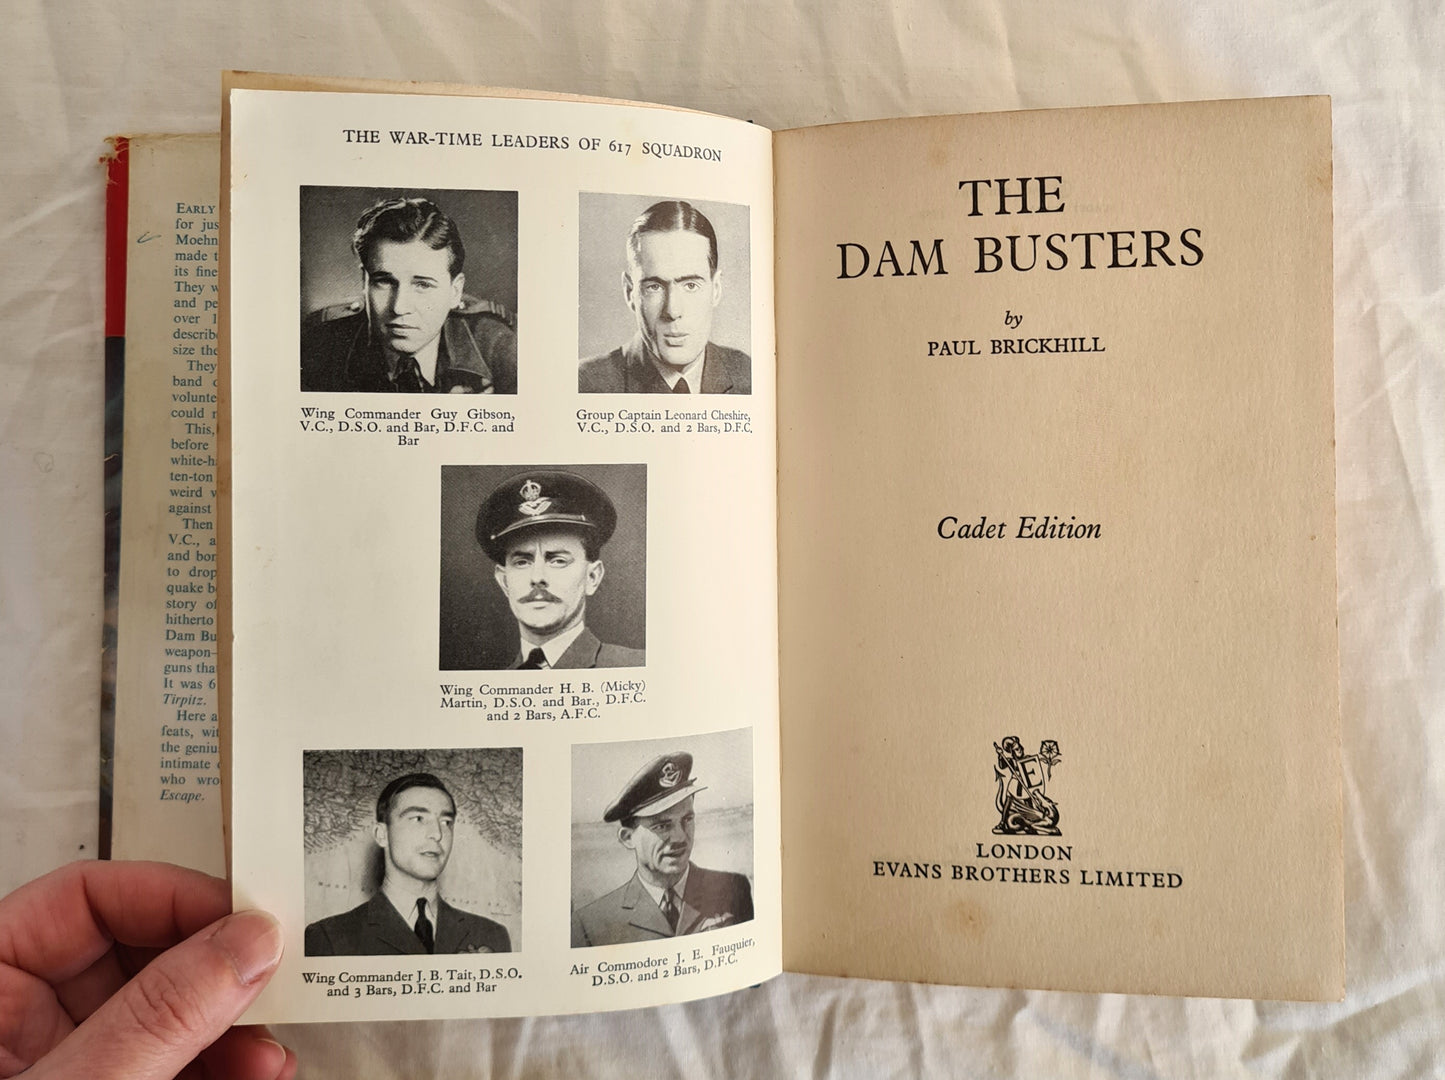 The Dam Busters by Paul Brickhill